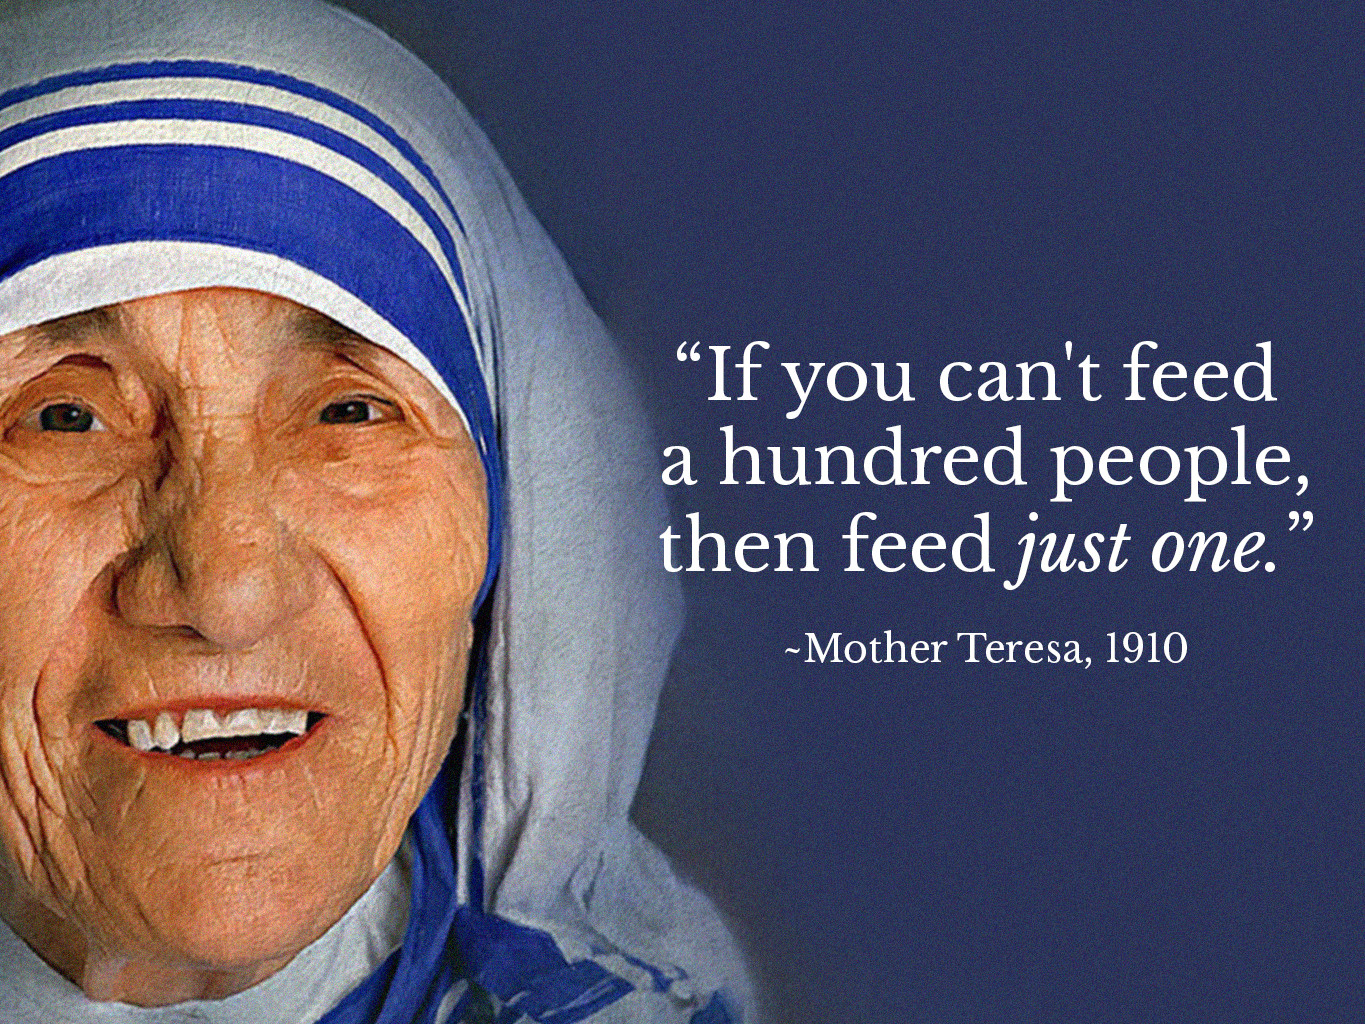 Mother Teresa Quotes On Service
 7 Timeless Customer Service Quotes To Live By